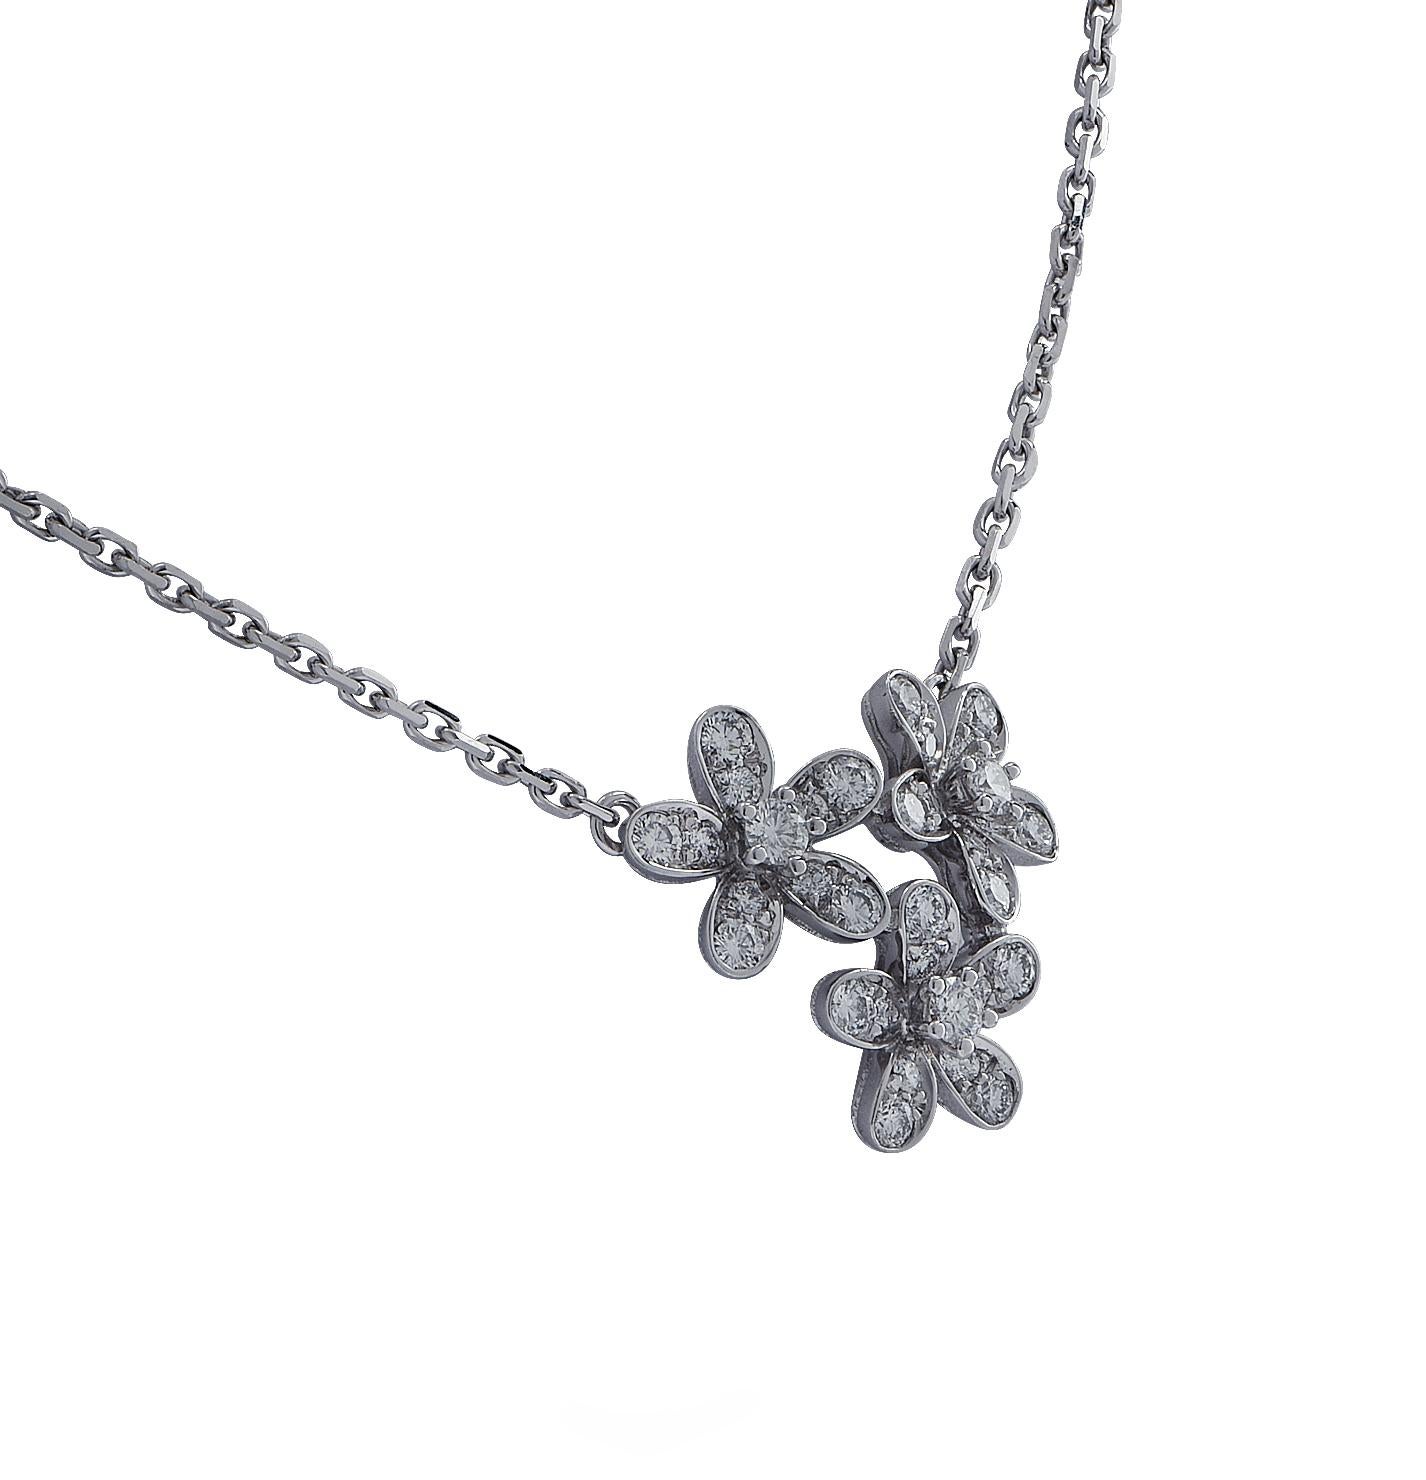 From the House of Van Cleef & Arpels, this exquisite Socrate 3 flowers pendant necklace, is finely handmade in 18 Karat white gold. The diamond encrusted flowers are daintily arranged, capturing the unparalleled beauty of nature. This stunning piece